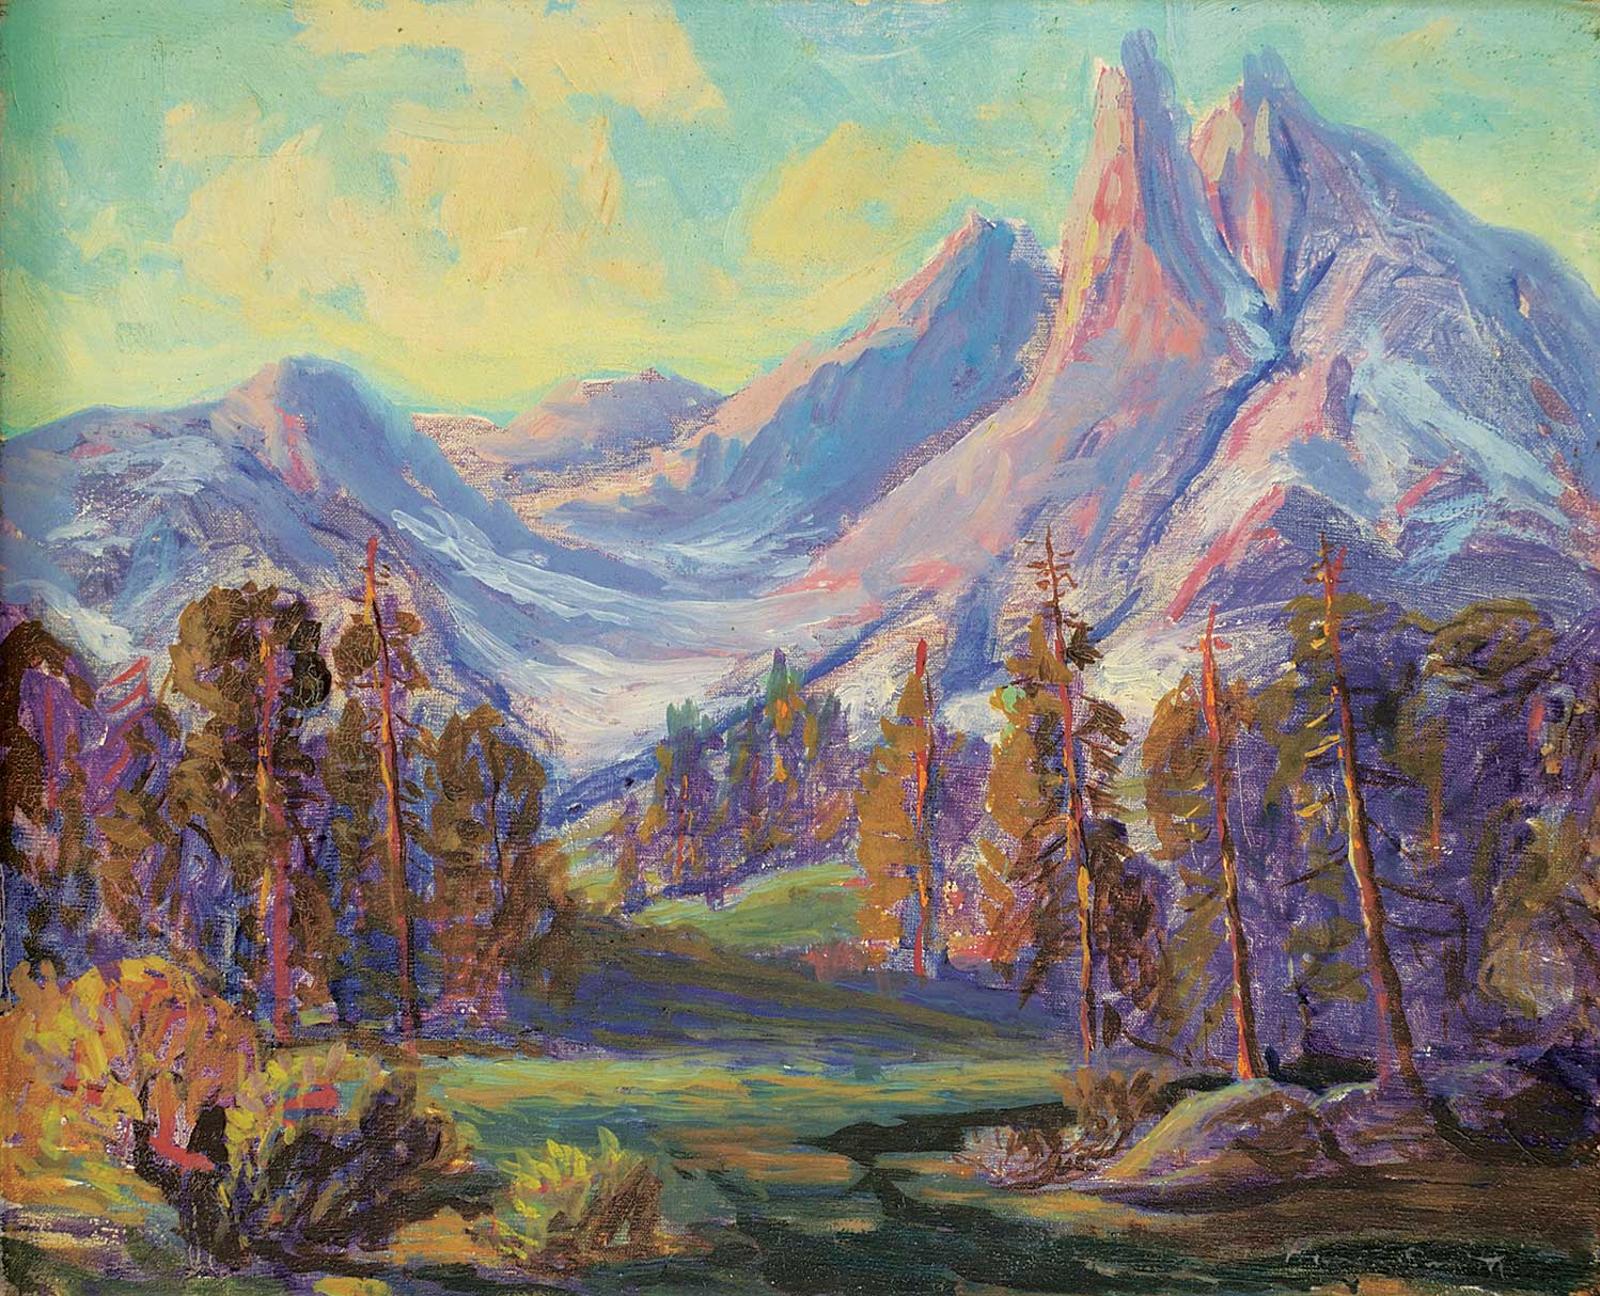 Cora A. Smith - Untitled - The Mountains in the Morning